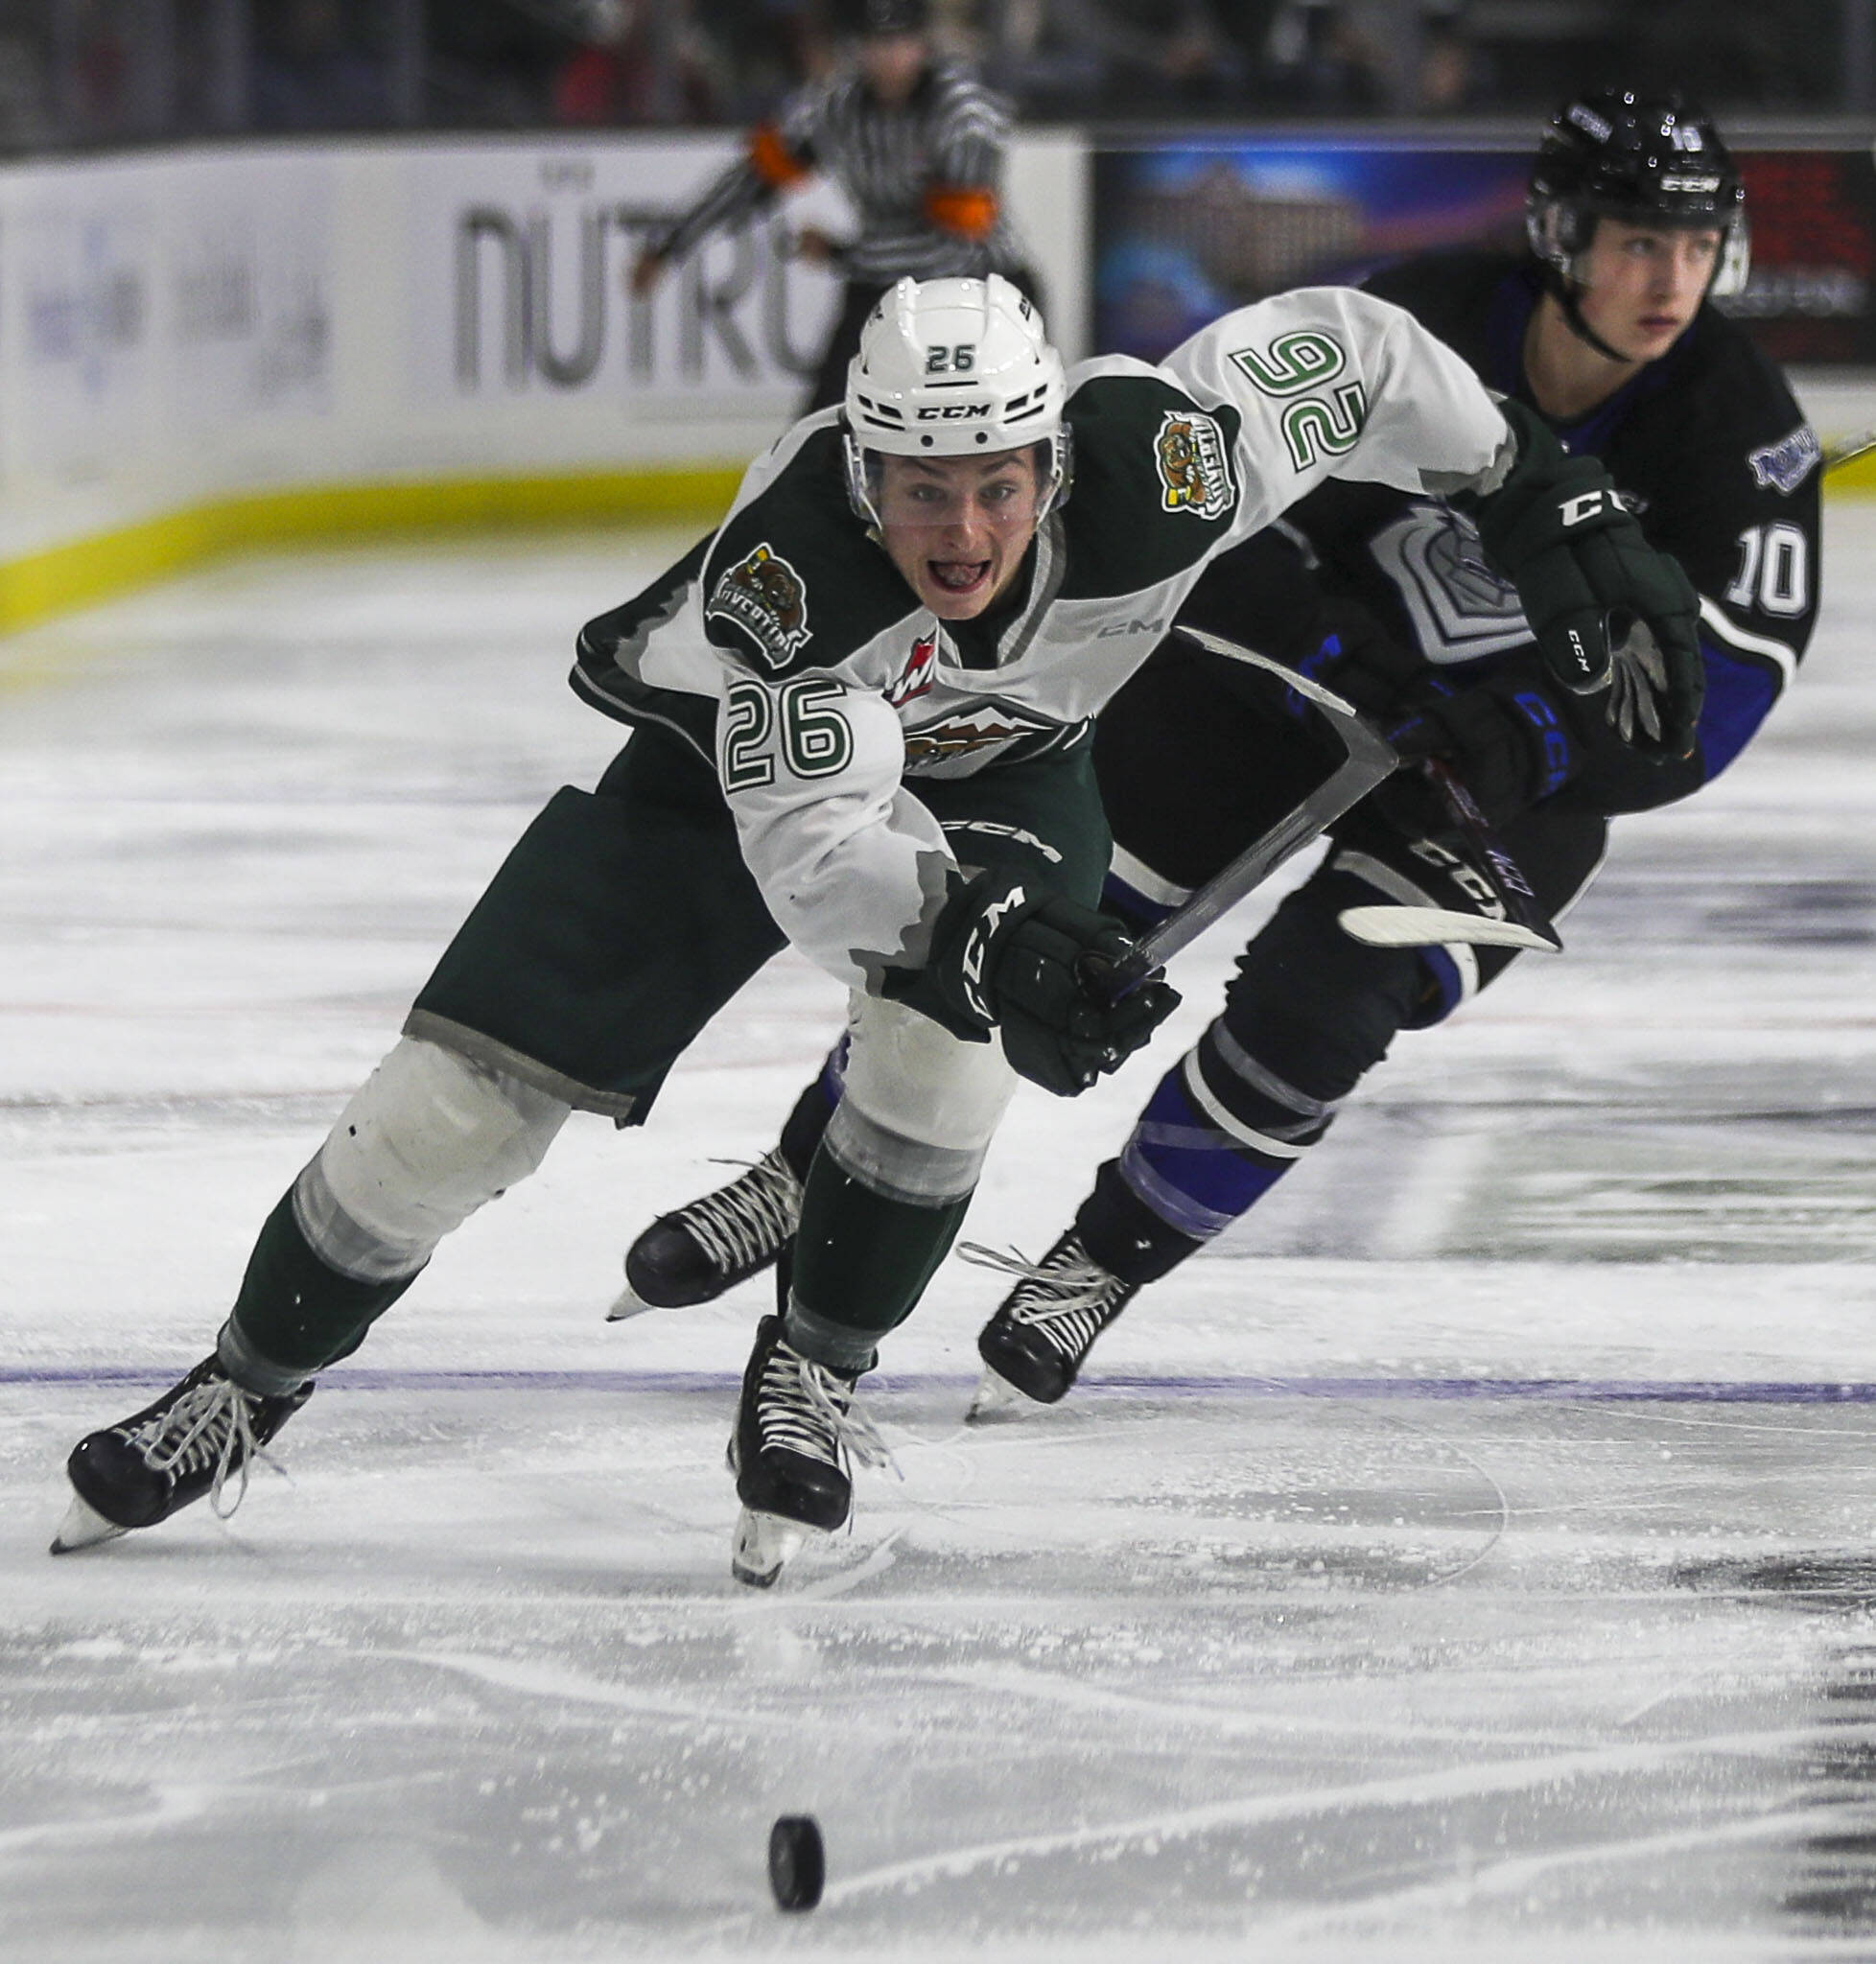 Silvertips’ Andrew Petruk (26) fights for the puck during a game between the Everett Silvertips and Victoria Royals at the Angel of the Winds Arena on Saturday, Sept. 23, 2023. The Silvertips won, 5-3. (Annie Barker / The Herald)